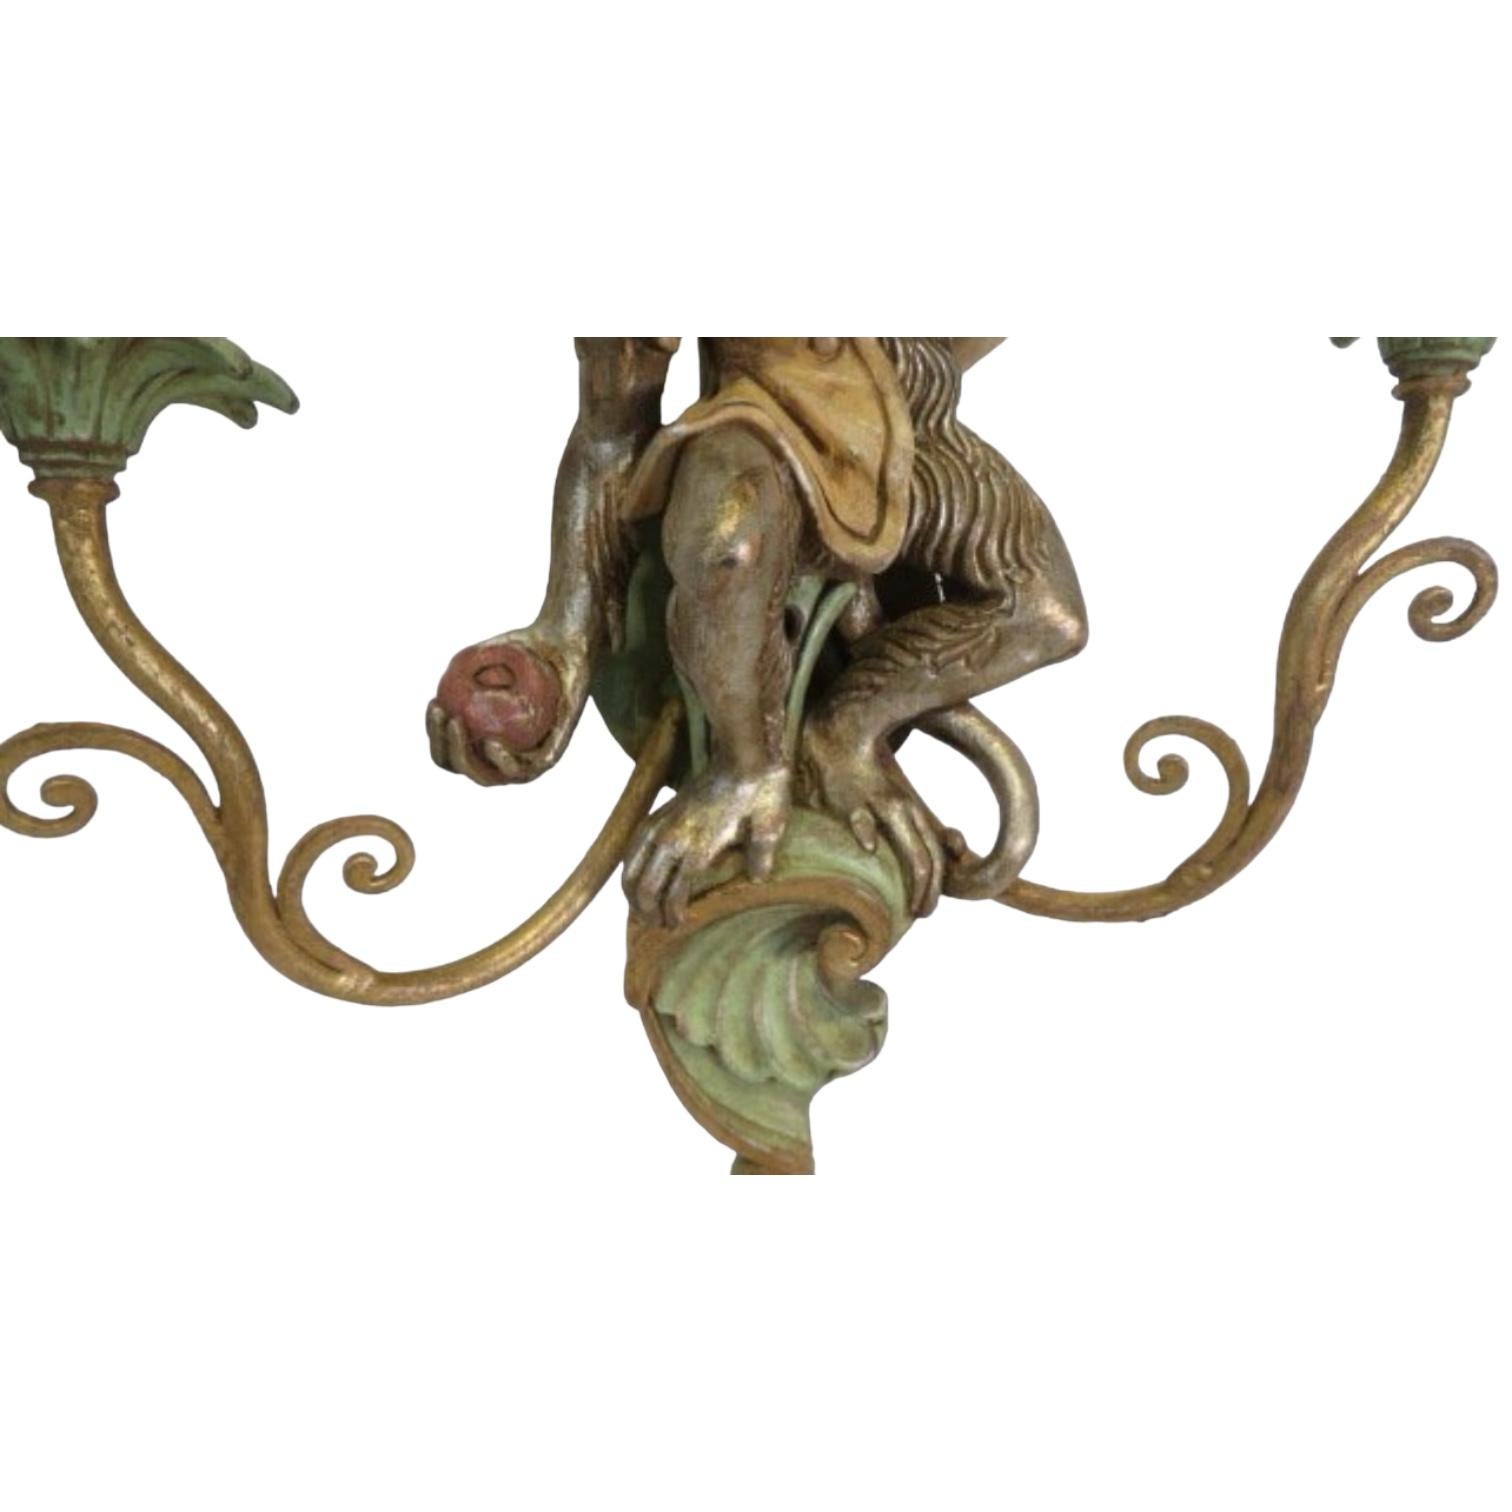 Decorative Crafts Italian Regency Style Carved Wood Monkey Palm Tree Sconces -2 For Sale 1